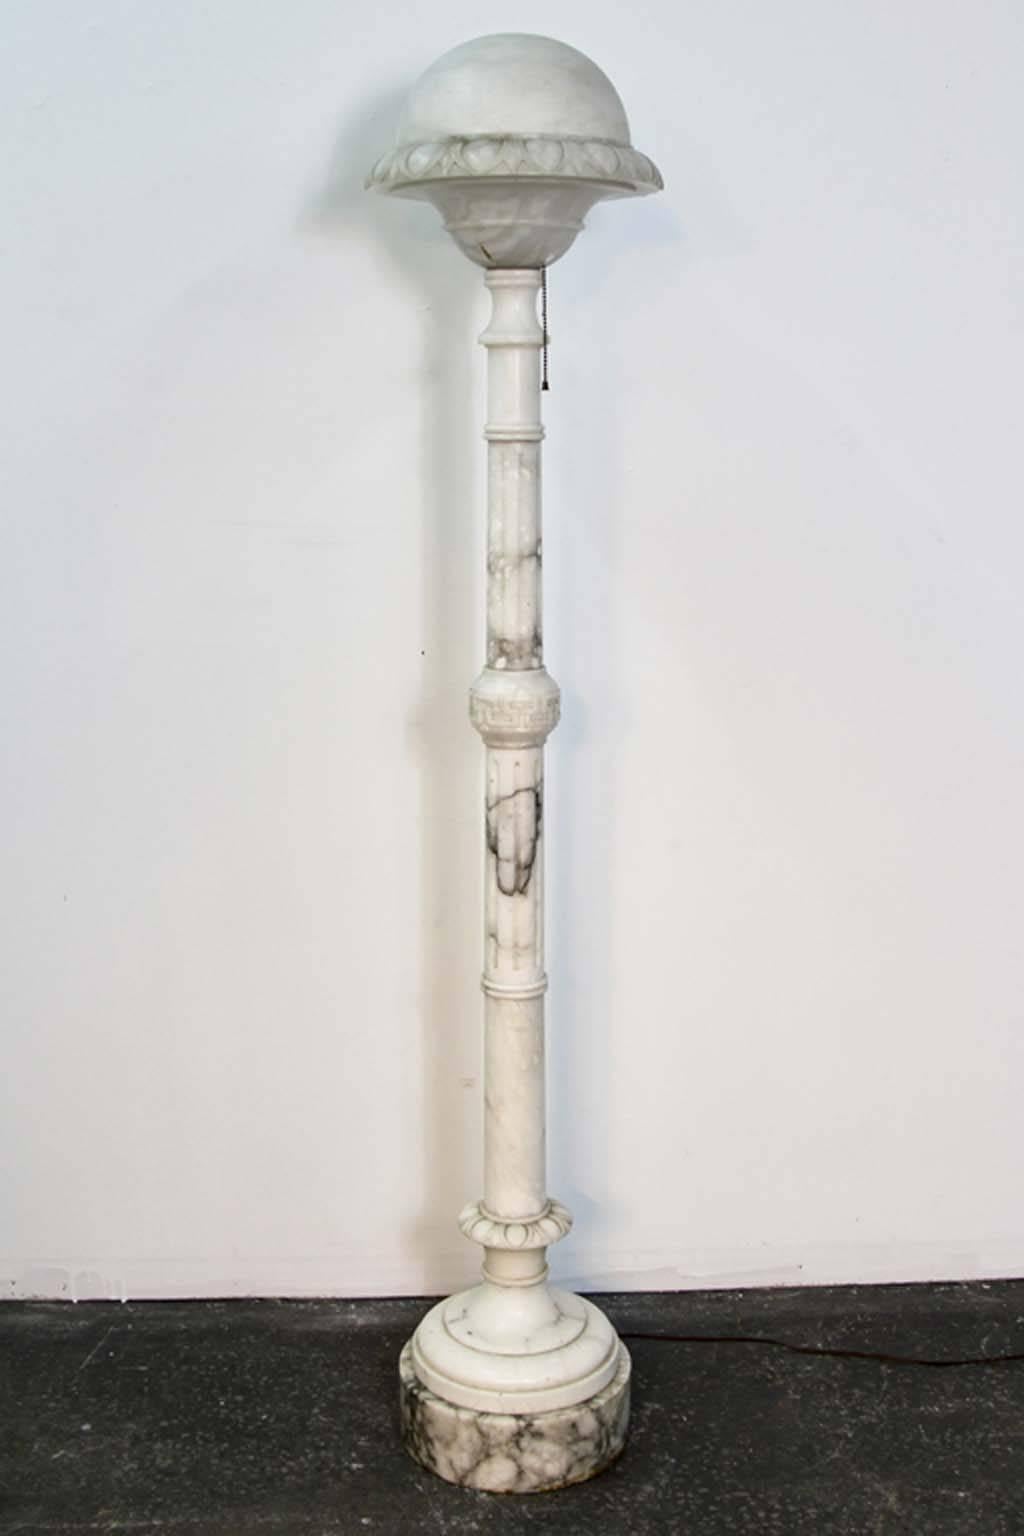 Finely carved antique alabaster floor lamp. Greek key design and domed top. Professional repair to dome top as shown in photos.